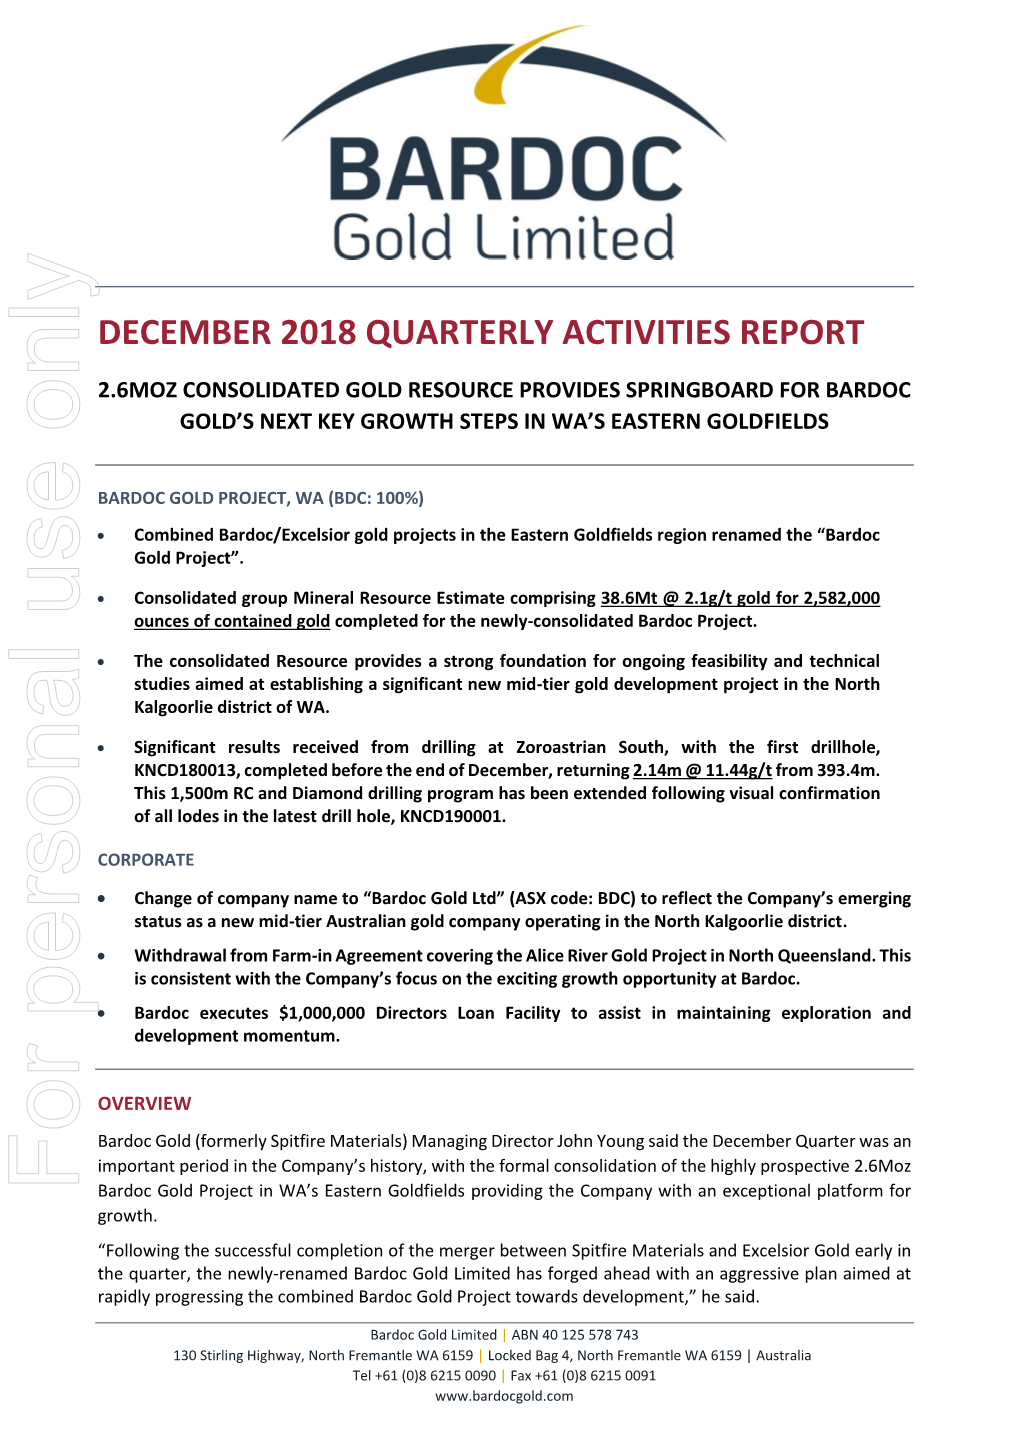 For Personal Use Only Use Personal for Bardoc Gold Project in WA’S Eastern Goldfields Providing the Company with an Exceptional Platform for Growth